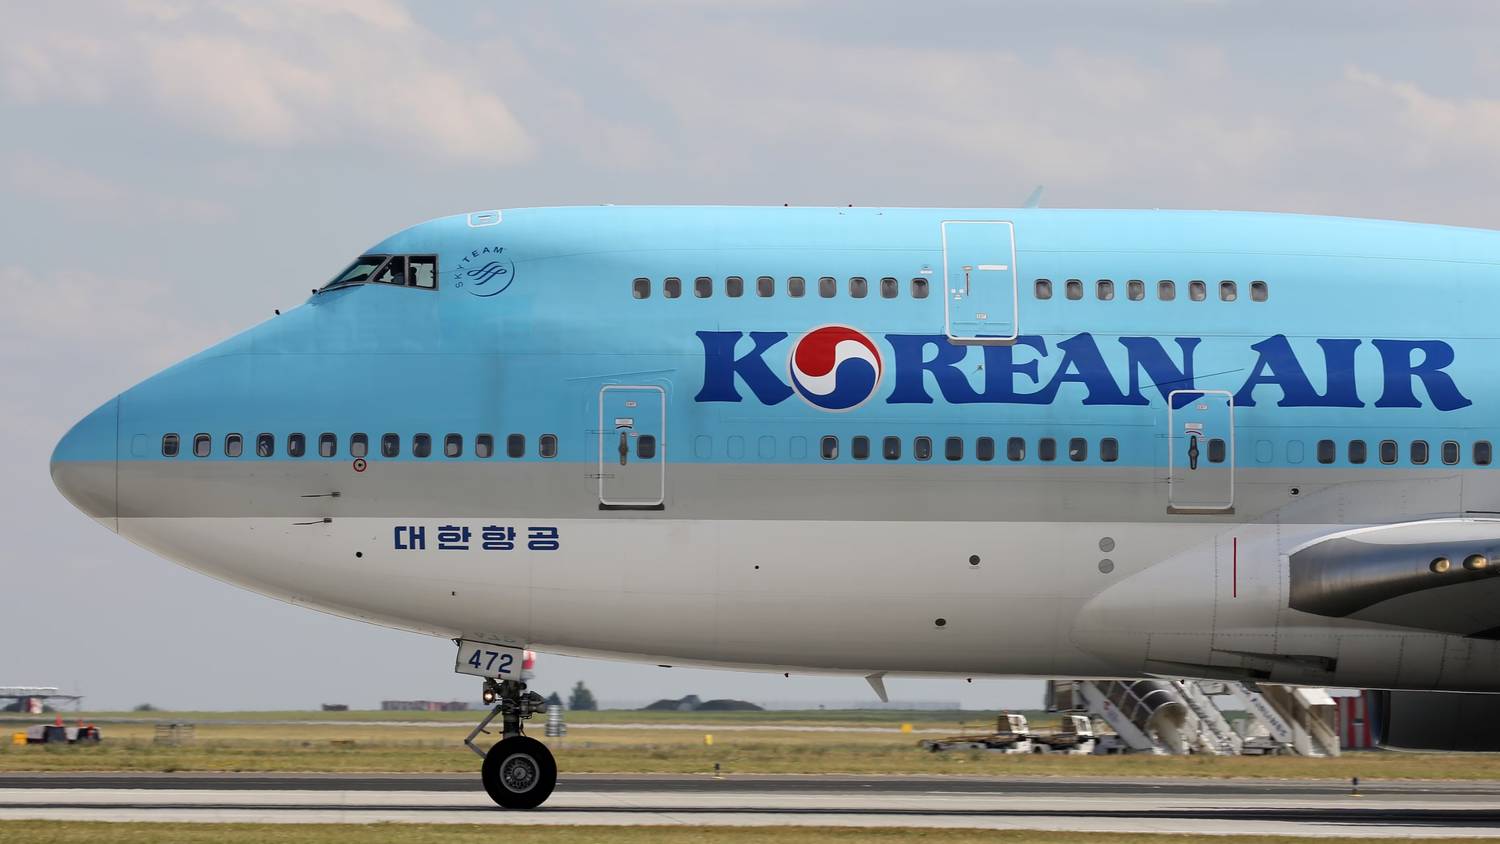 A Korean Air Boeing 747-400 on a taxiway.